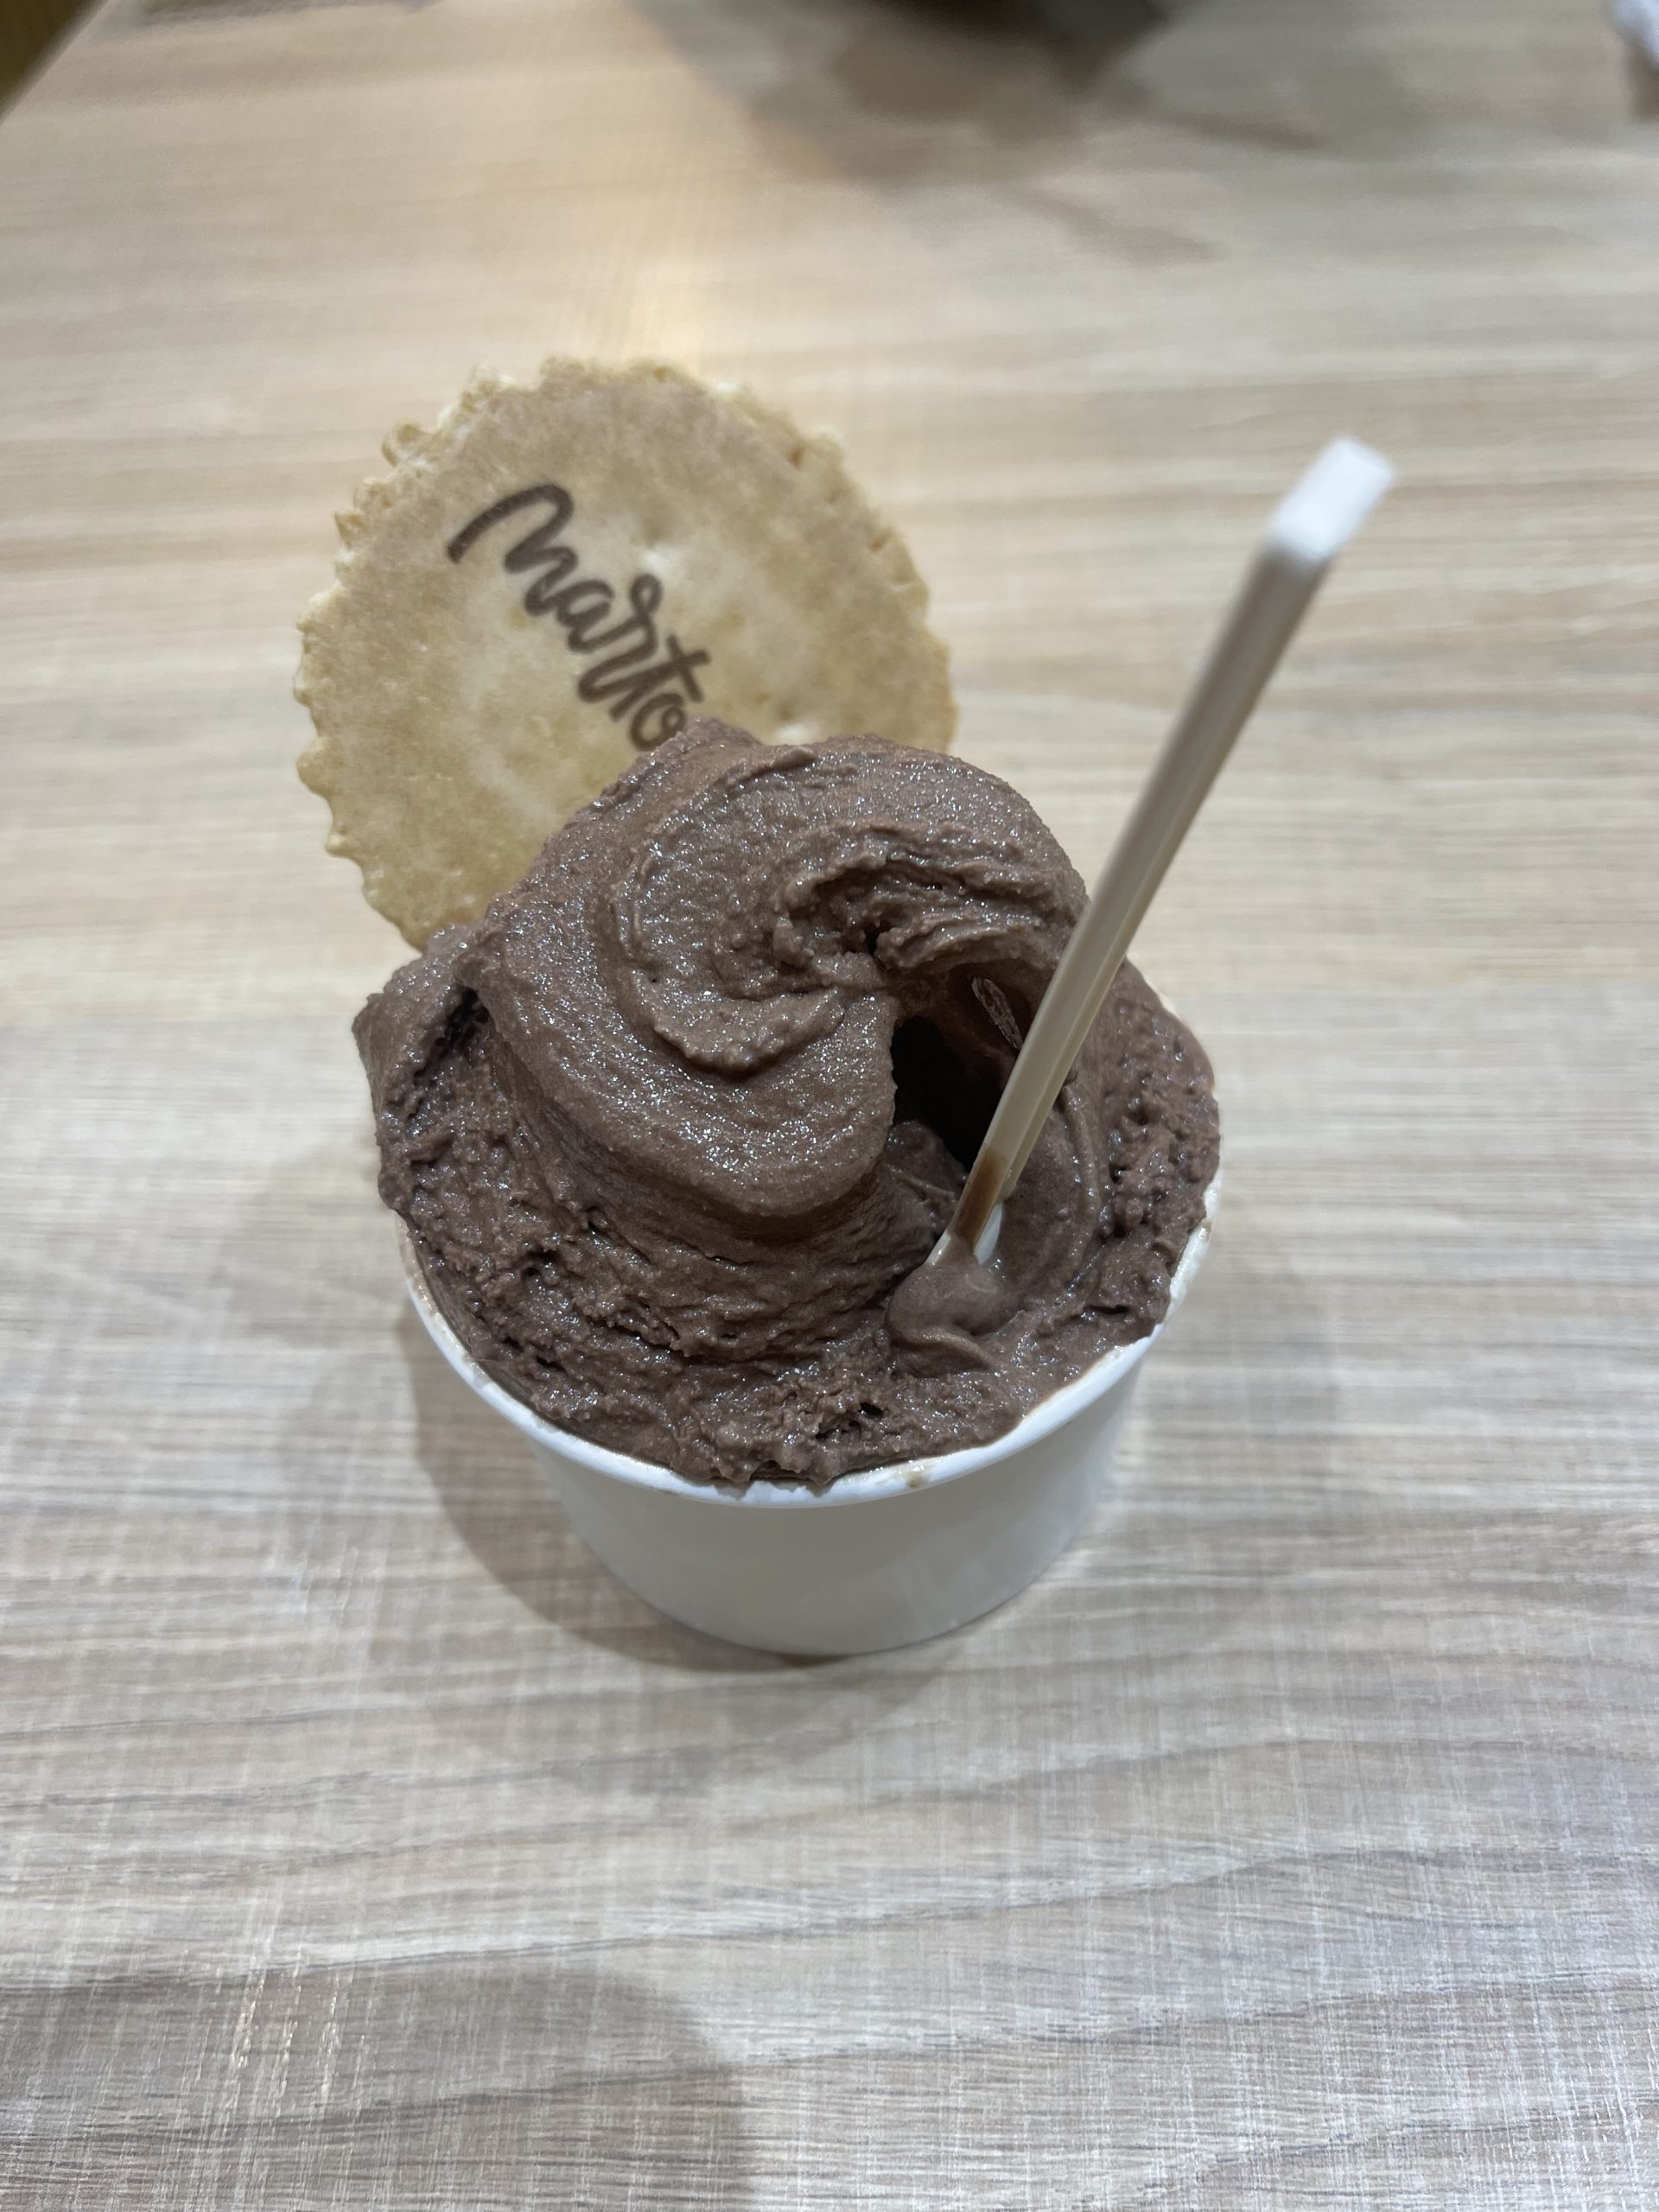 A picture of chocolate ice cream with a wafer.